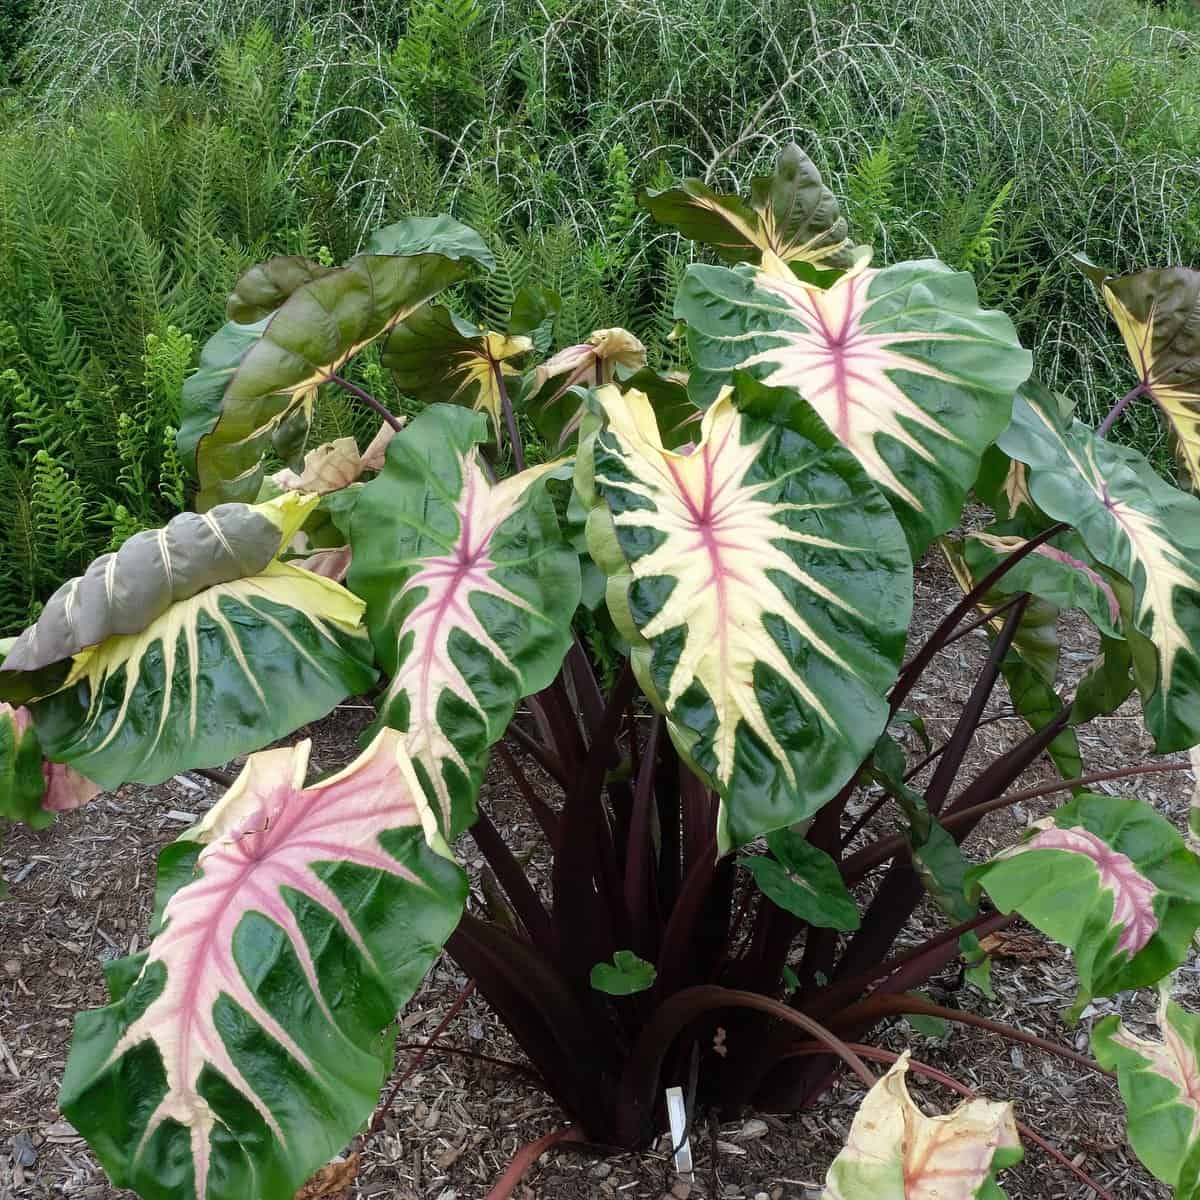 Waikiki colocasia plants with leaved edged in green with creamy white centers and a pink center.